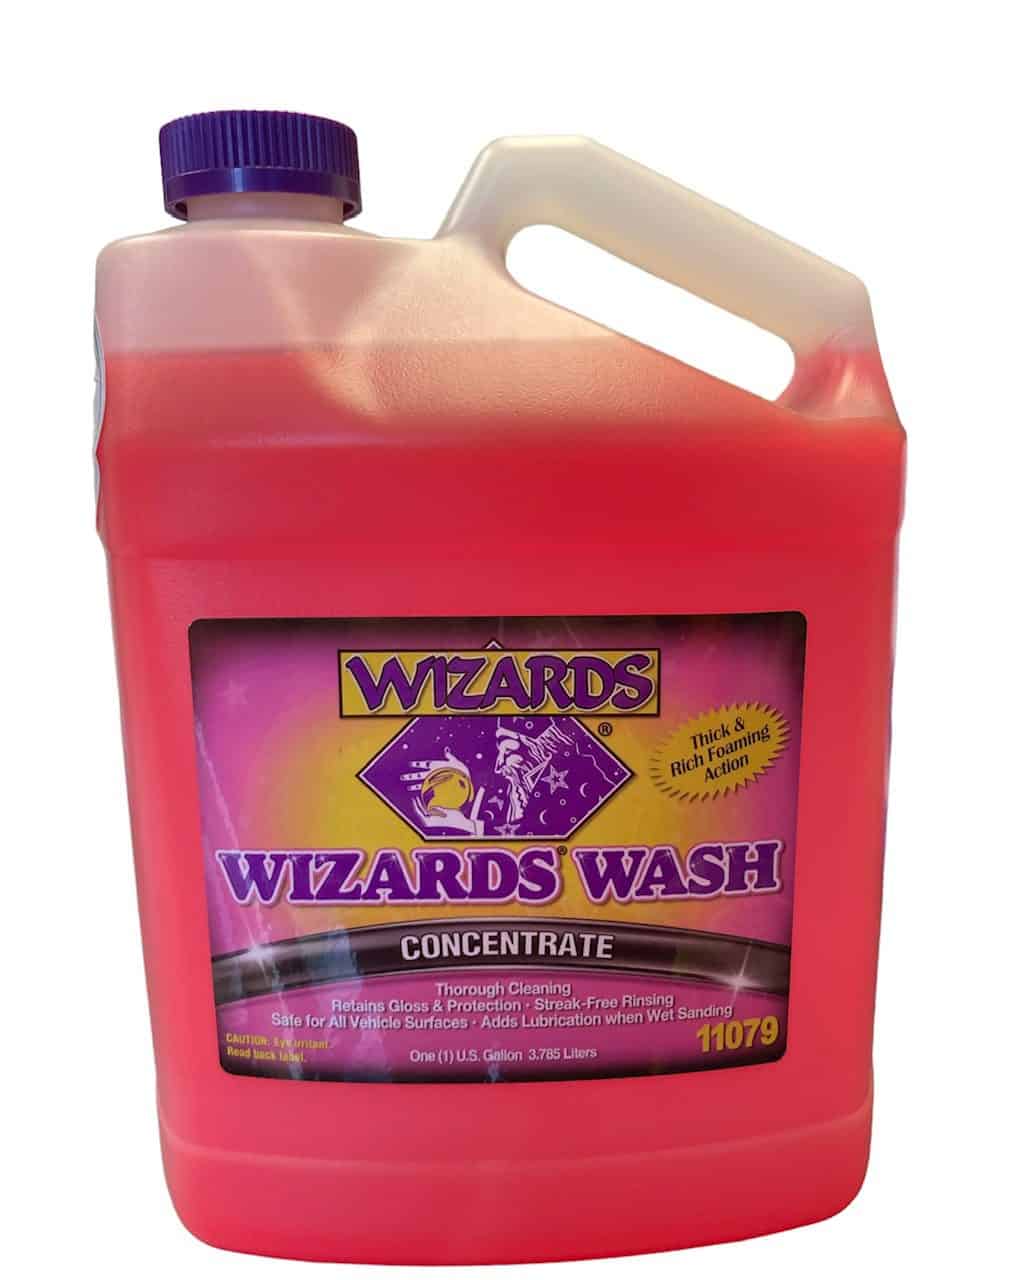 WIZARDS 11079 Super Concentrated Car Wash, 1 gal 2